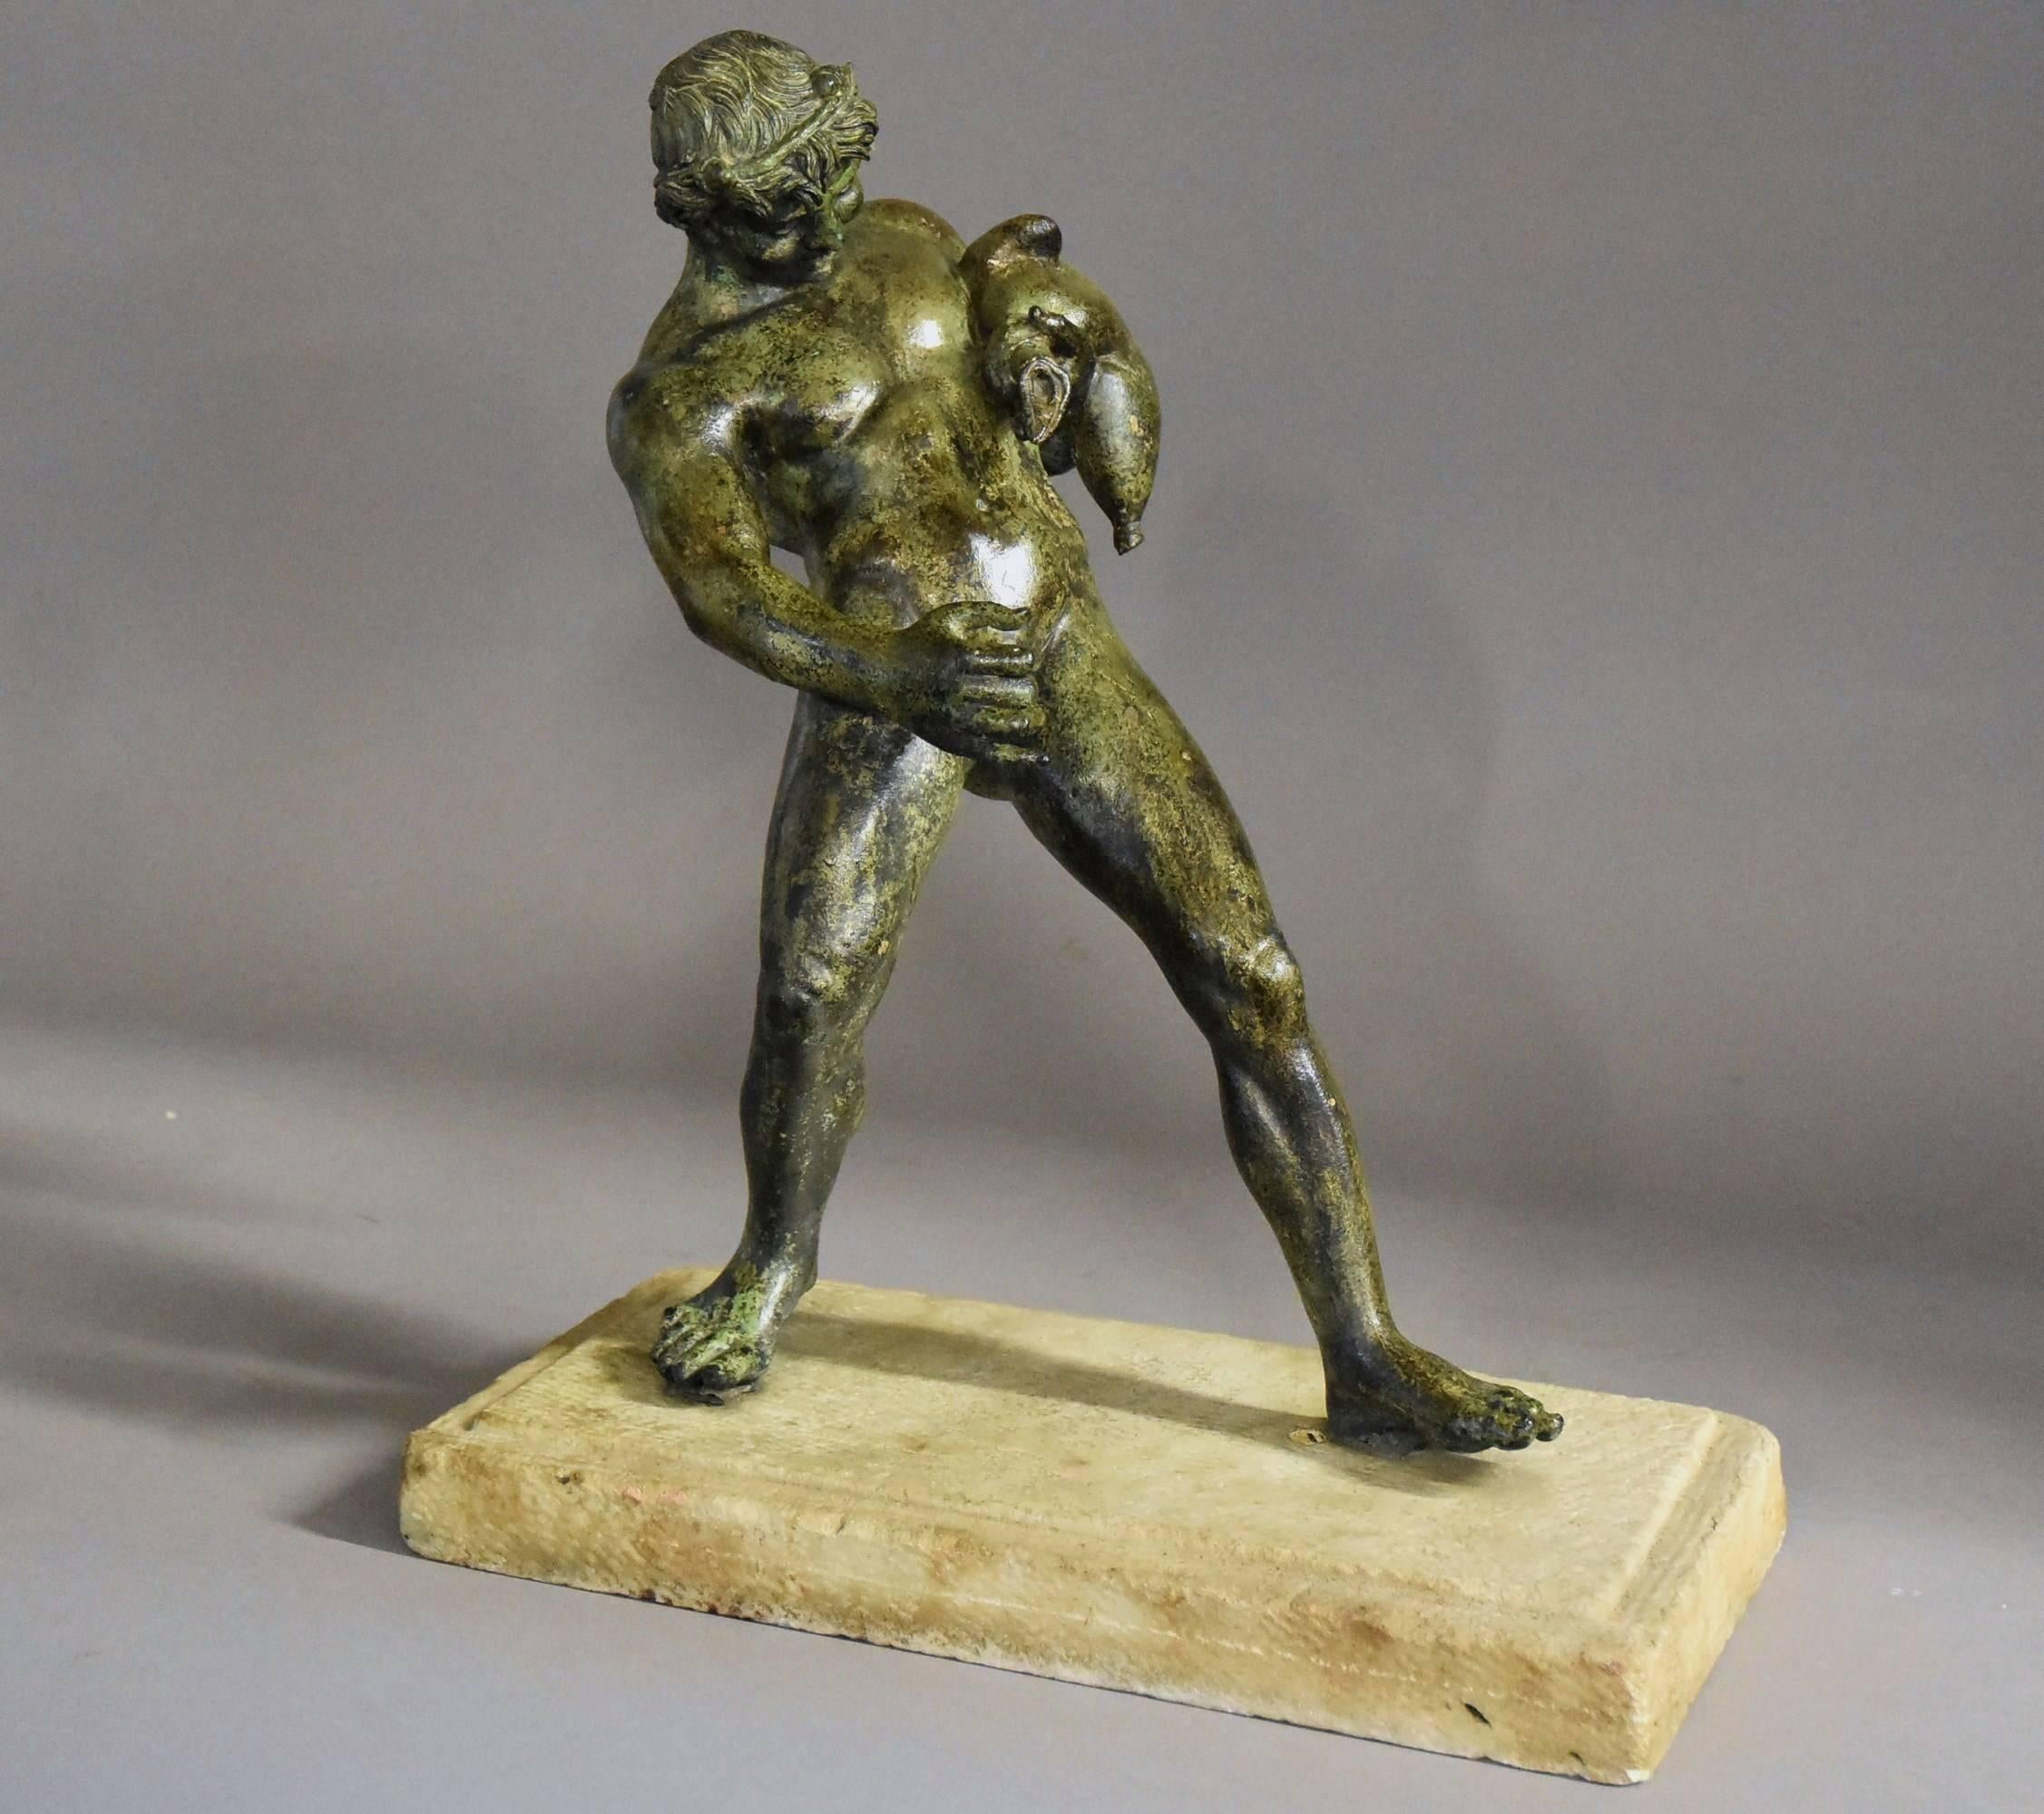 A good quality late 19th-early 20th century Grand Tour style bronze of Bacchus (God of wine), after The Antique, with green patination mounted on a rough cut marble base.

This figure is depicted holding a wine skin in his left hand and is